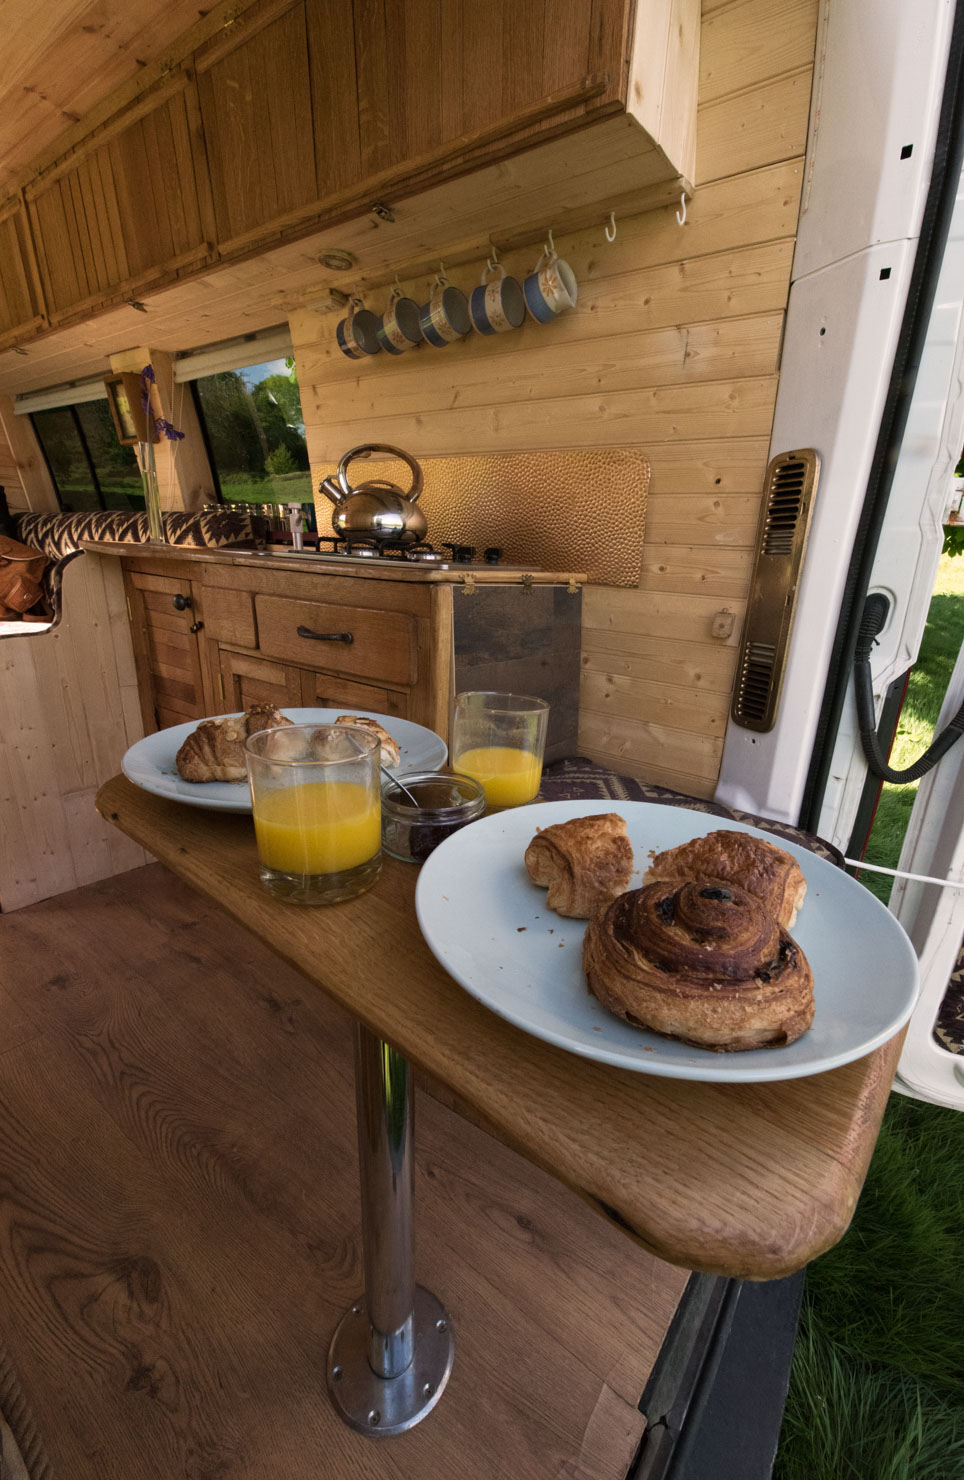 A campervan interior with wooden walls and flooring is shown. A small fold-out table holds two white plates, each with pastries, and two glasses of orange juice. In the background, a countertop with a kettle, hanging cups, and a window with a scenic view is visible.